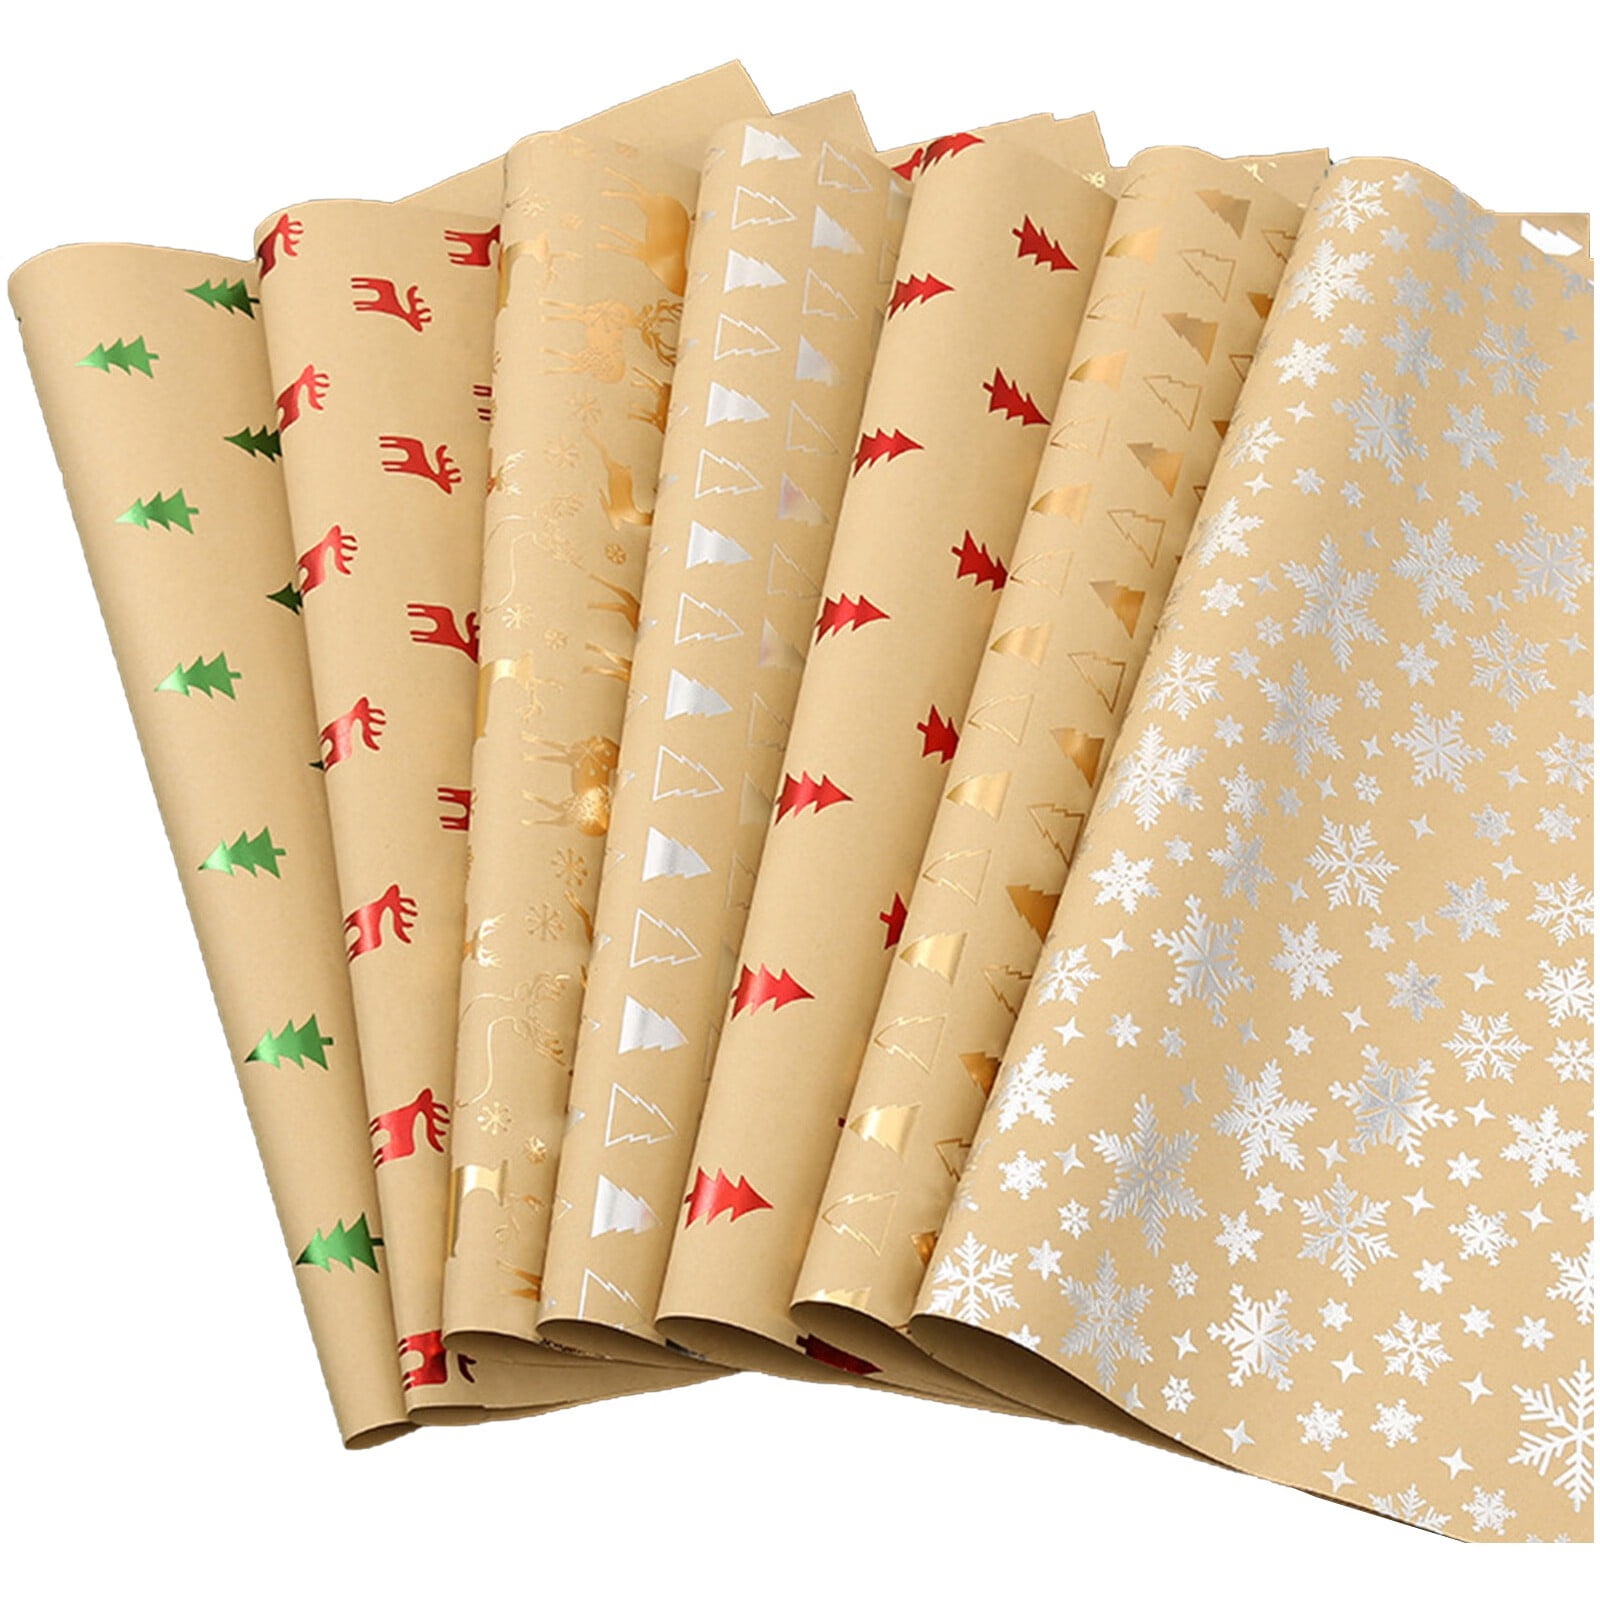 1PC DIY Men's Women's Children's Christmas Wrapping Paper Holiday